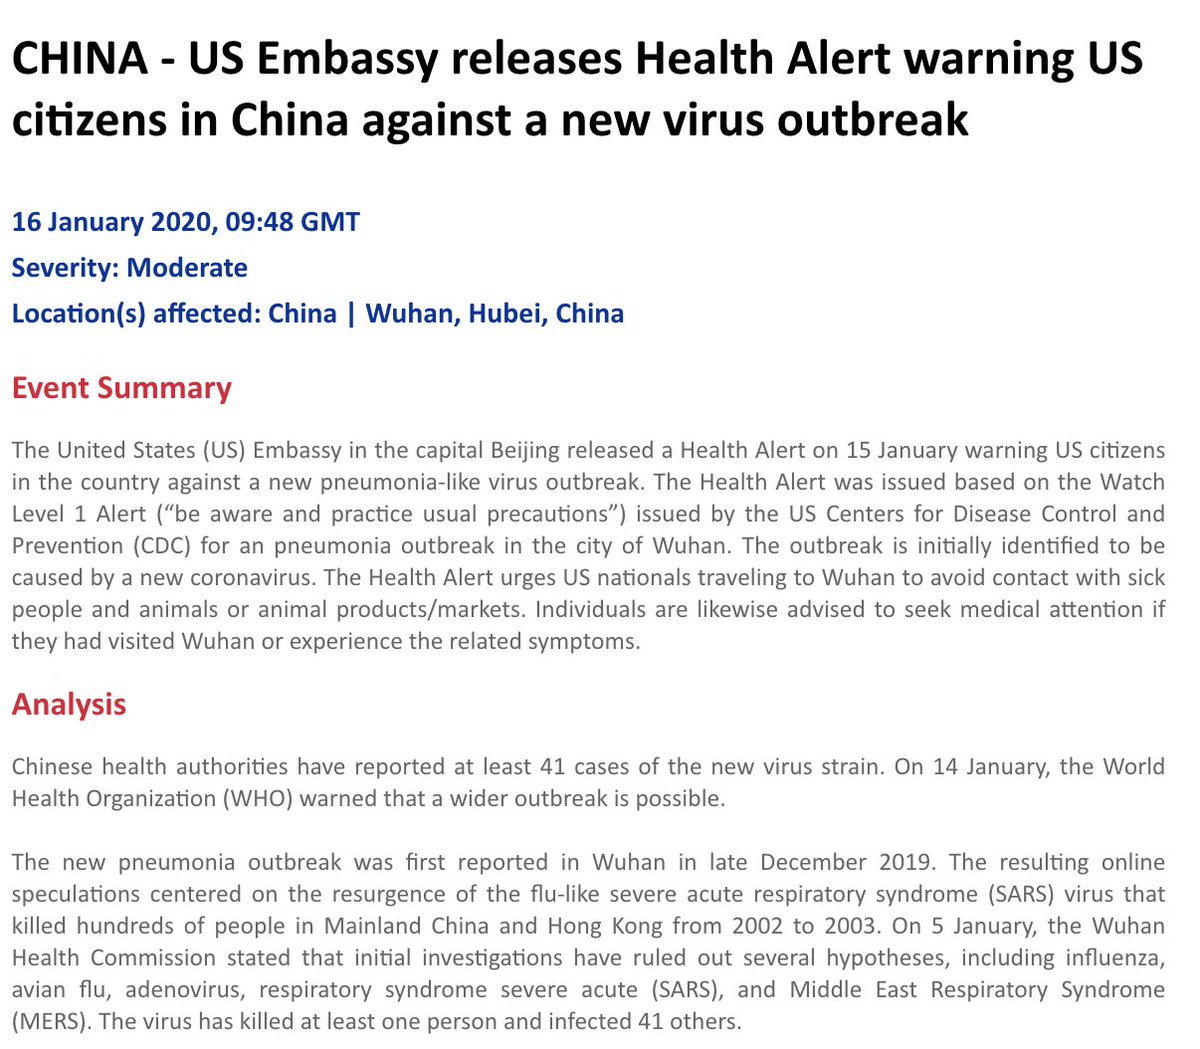 January 16: The US Embassy in Beijing released a health alert warning citizens against a pneumonia-like virus outbreak, with over 41 cases being reported by Chinese authorities. I received the alert through our system but life remained as normal as we continued through classes.